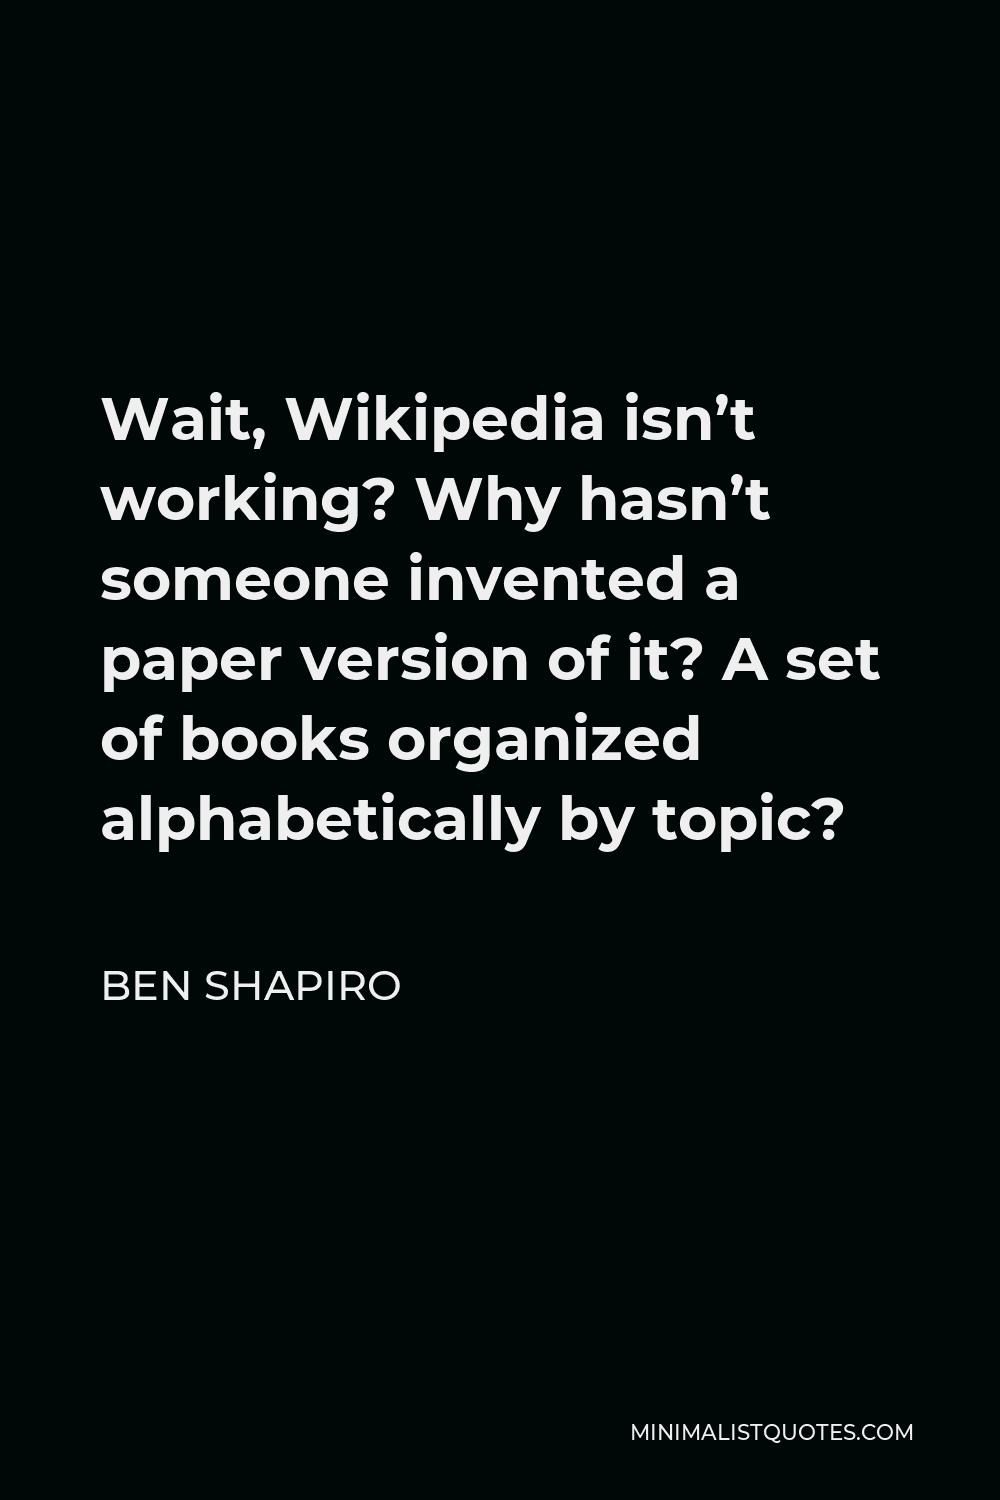 Ben Shapiro Quote - Wait, Wikipedia isn’t working? Why hasn’t someone invented a paper version of it? A set of books organized alphabetically by topic?